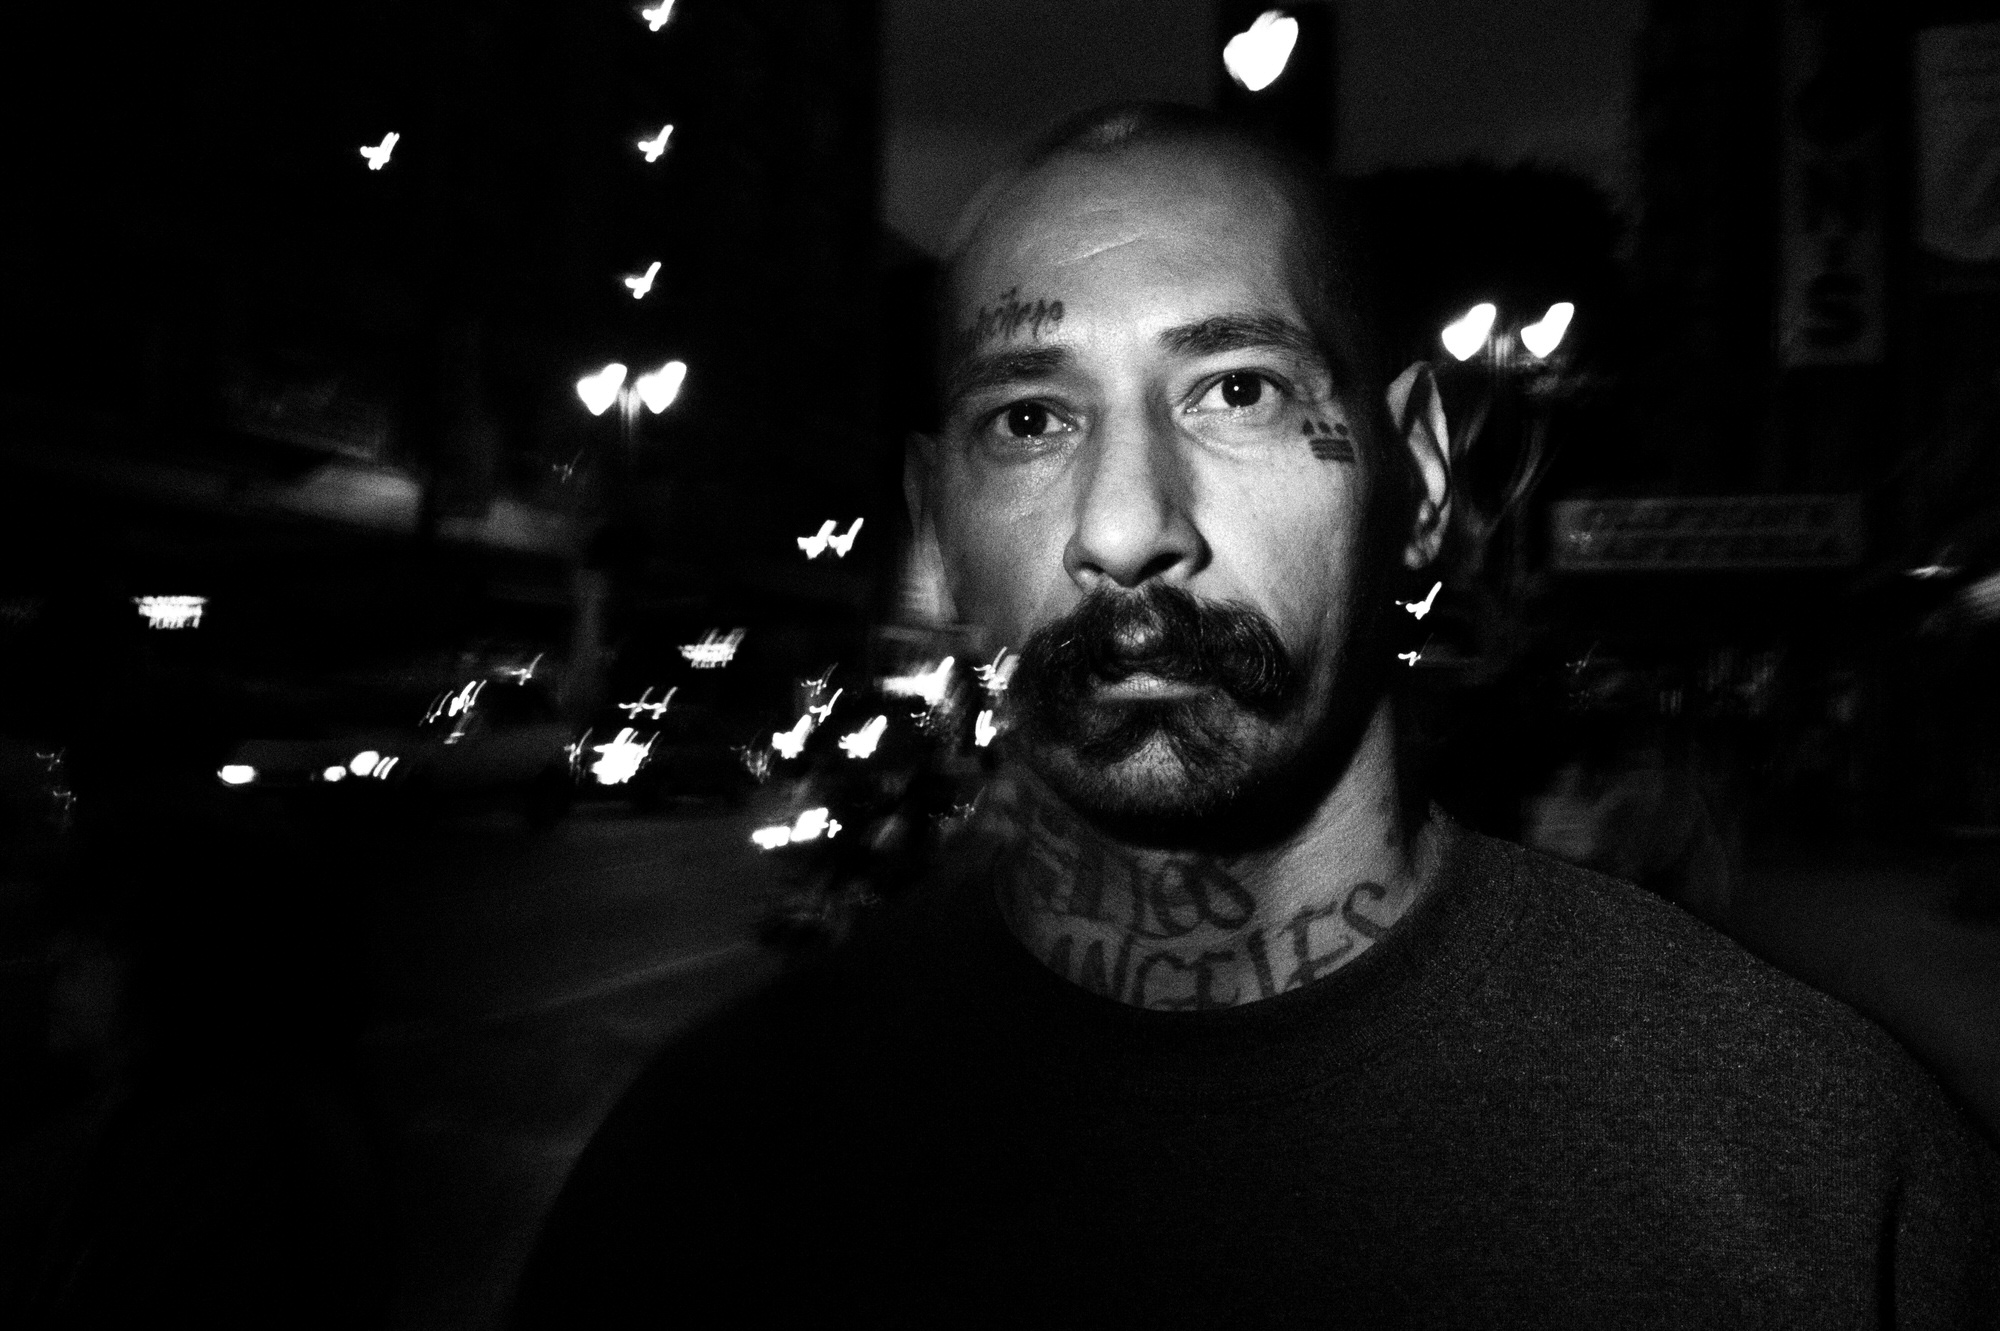 eric kim street photography - the city of angels - black and white-4-street-portrait-hearts-tattoo-downtown-la